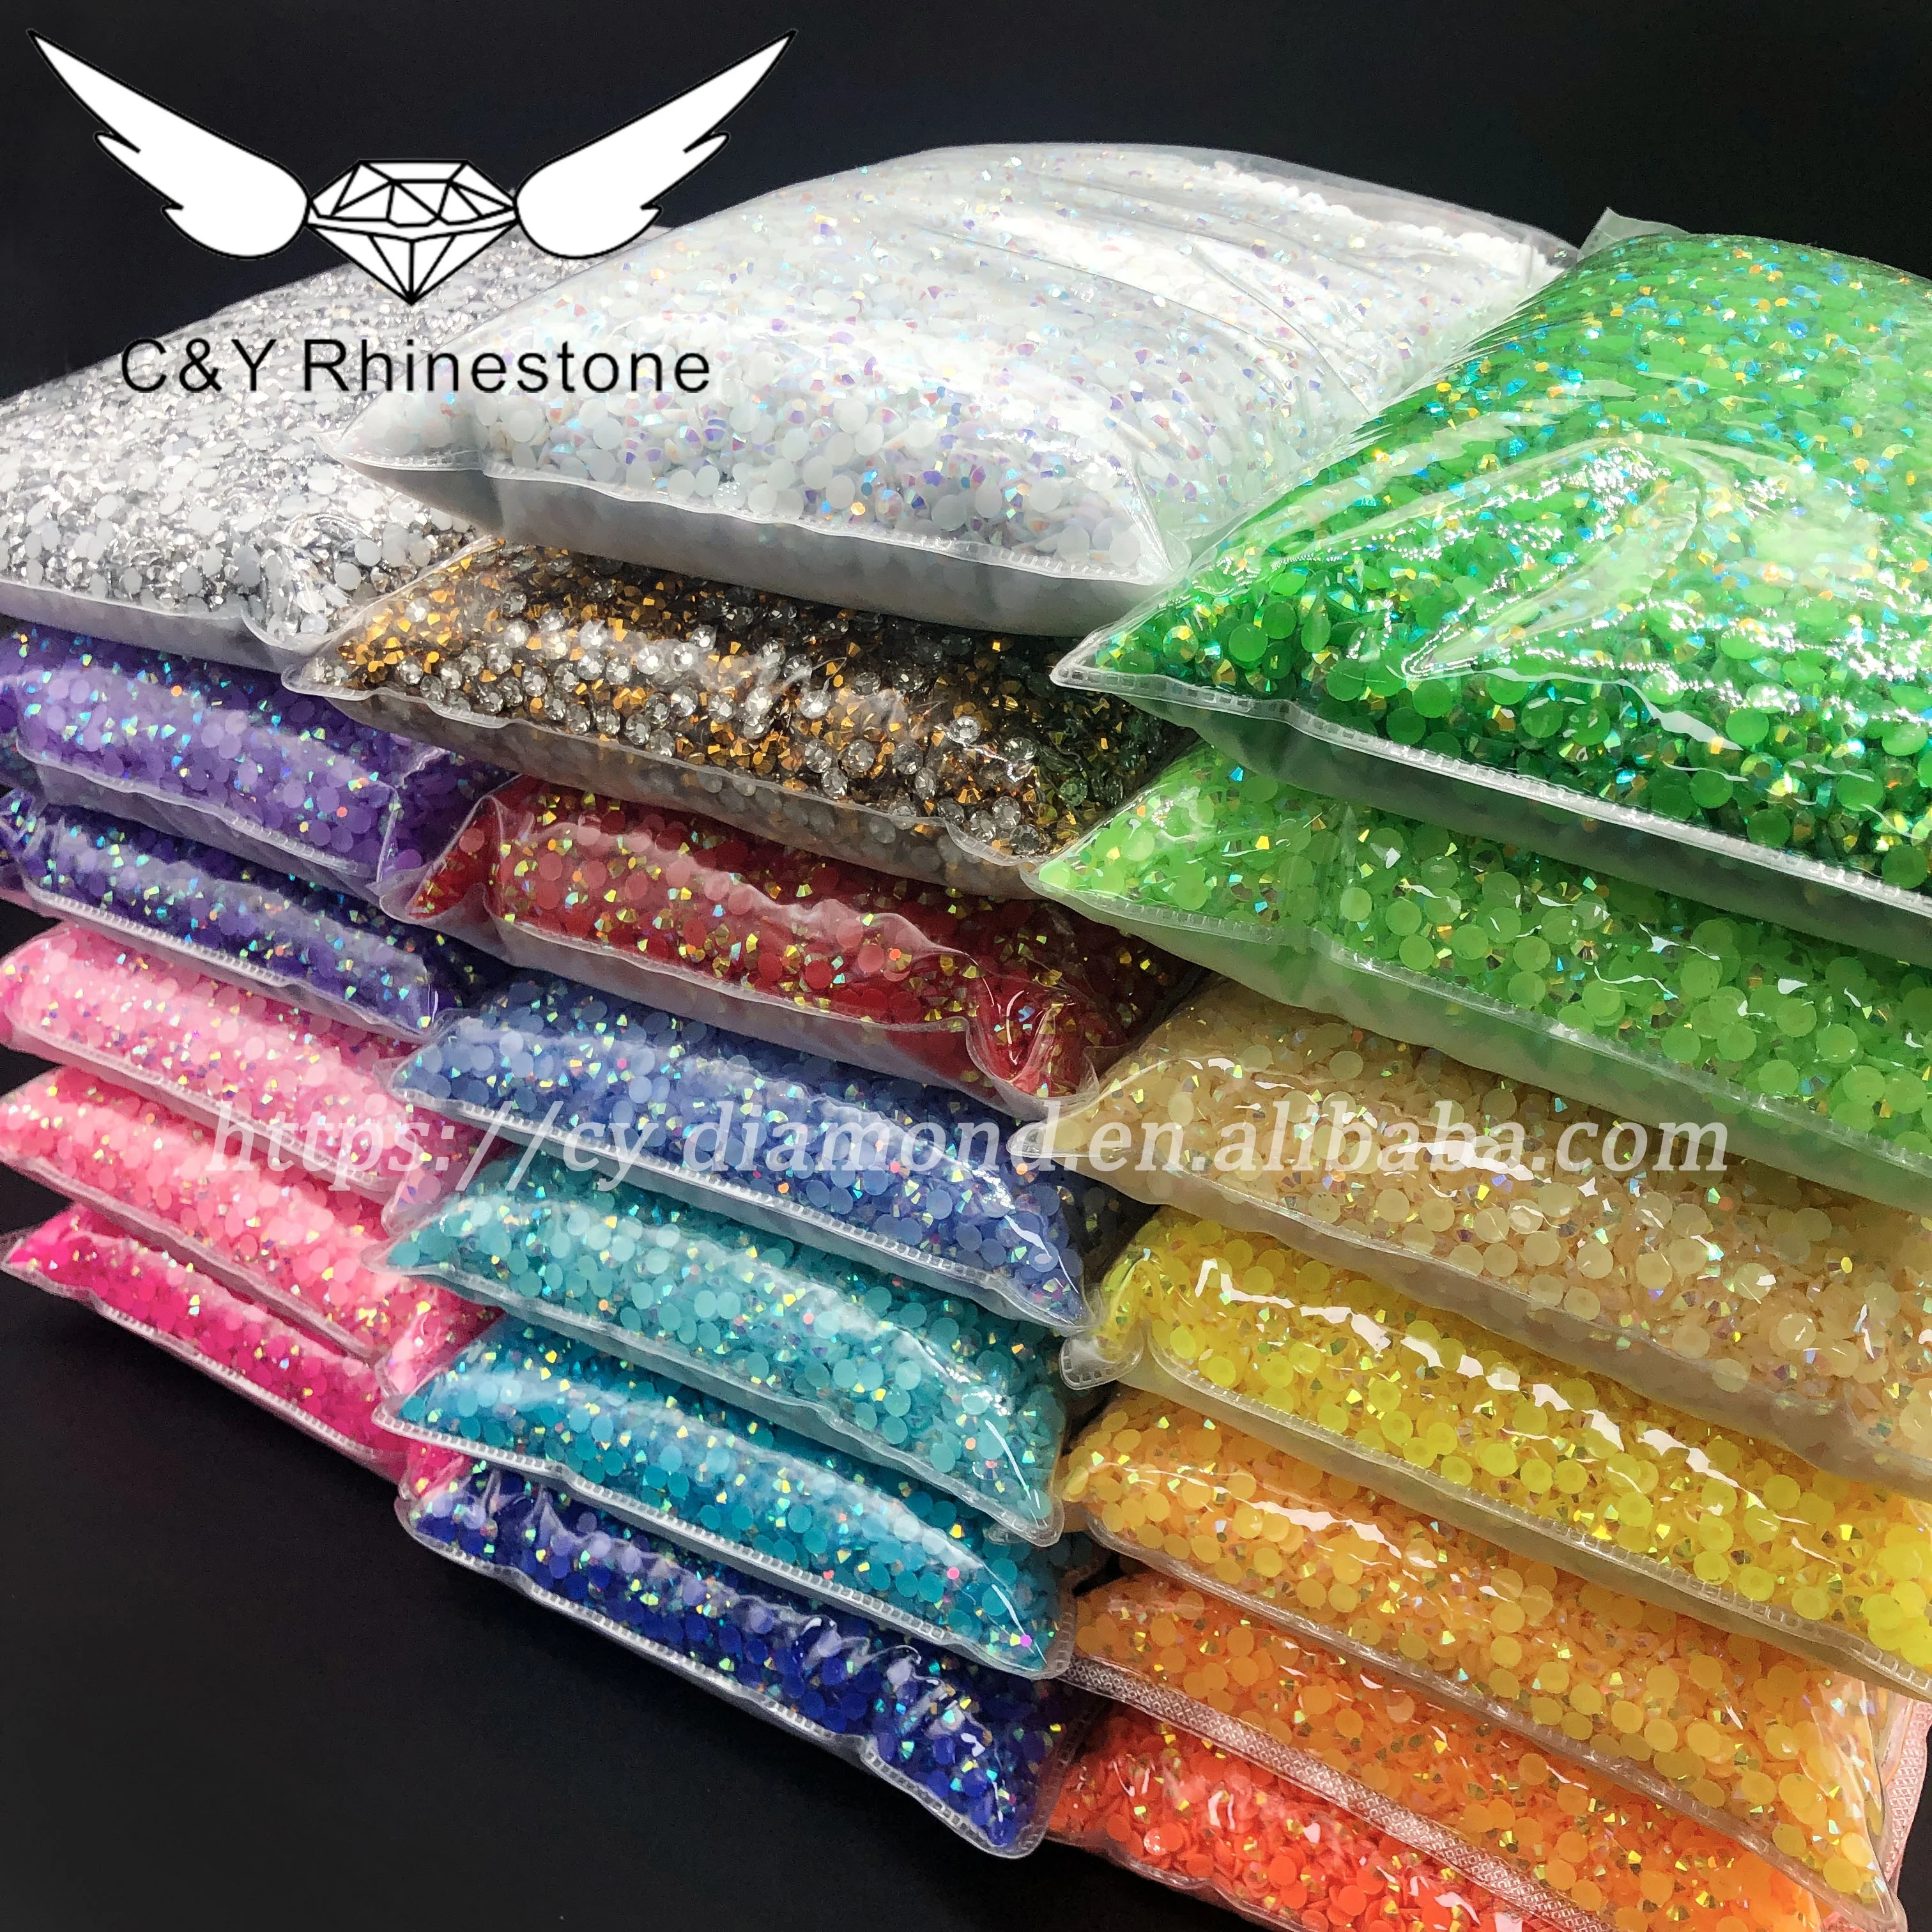 

Rhinestones Crystal AB Resin Non Hot Fix Strass Flatback Wholesale 2mm 3mm 4mm 5mm 6mm Stones Jelly Pink High Grade